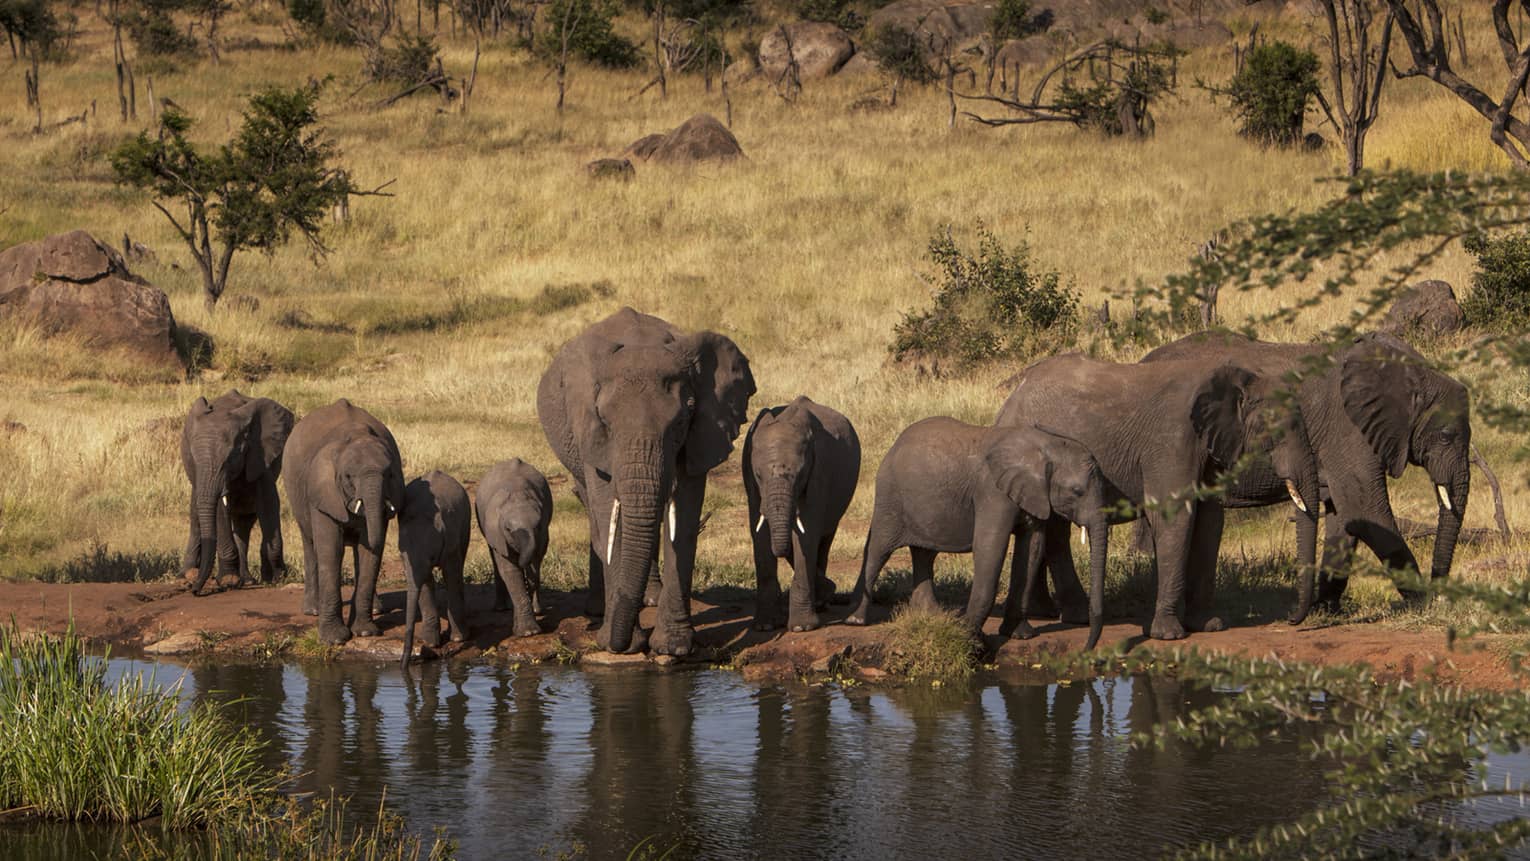 A pack of elephants drinking from a watering hole